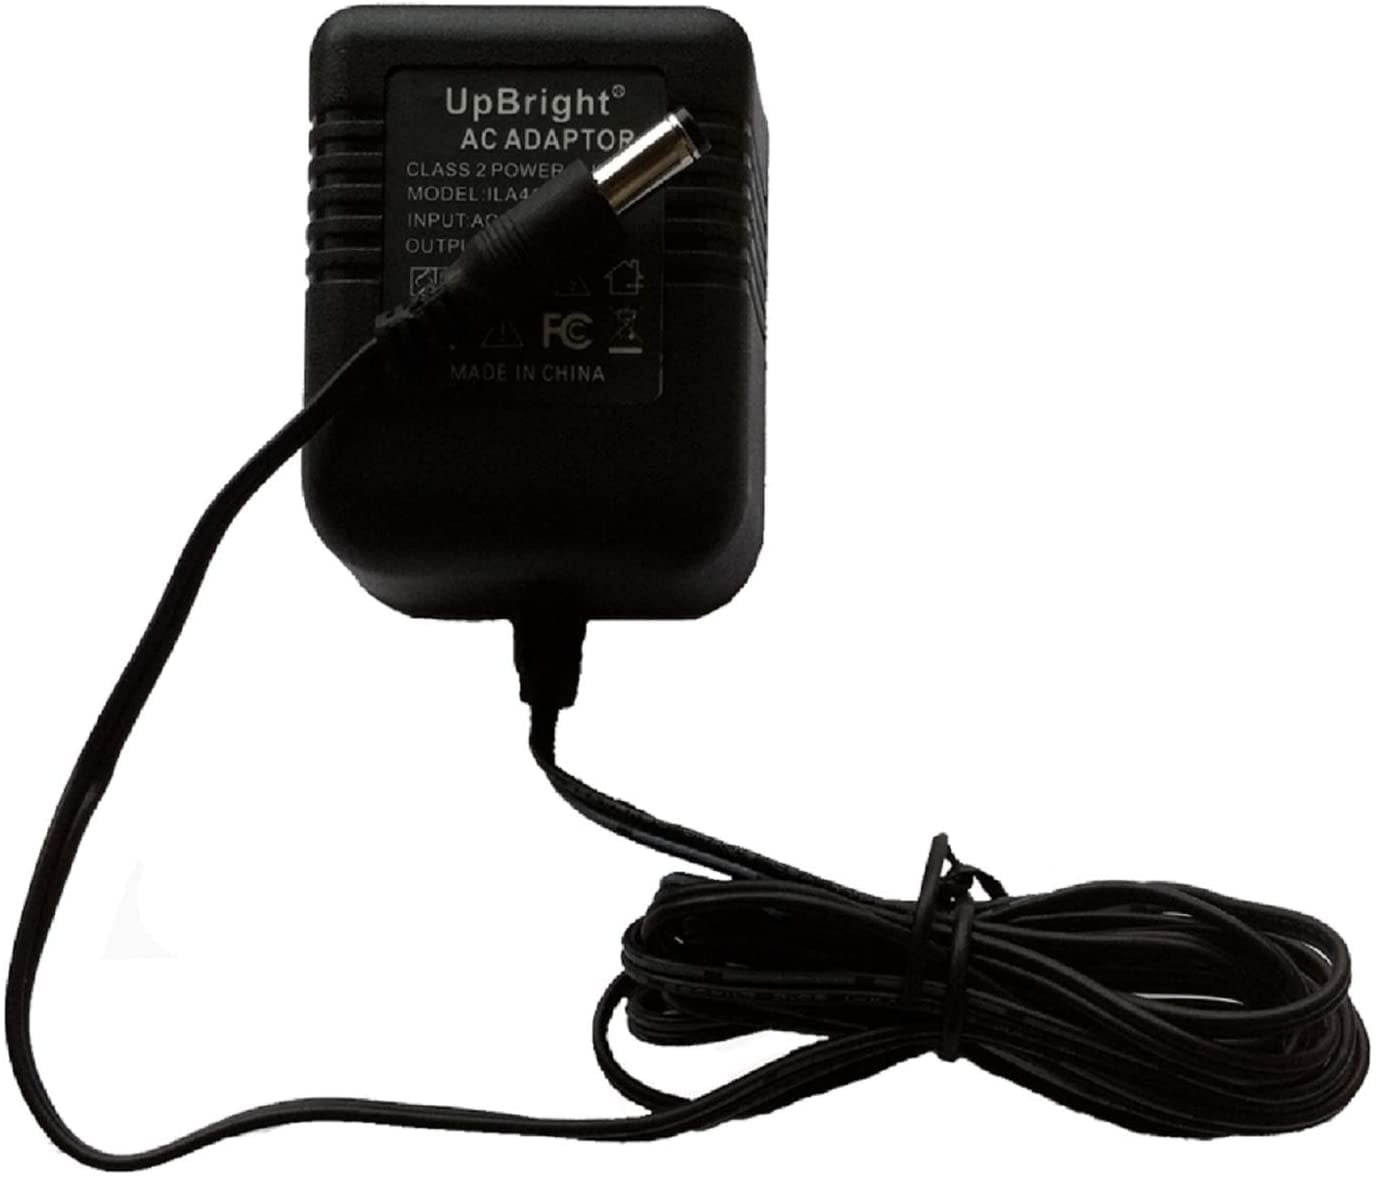 UPBRIGHT New 9V AC-AC Adapter For DigiTech GNX3000 GNX-3000 GNX-2 GNX-3  Guitar Workstation Effect Pedal 9VAC Power Supply Cord Cable PS Charger  Mains PSU - Walmart.com